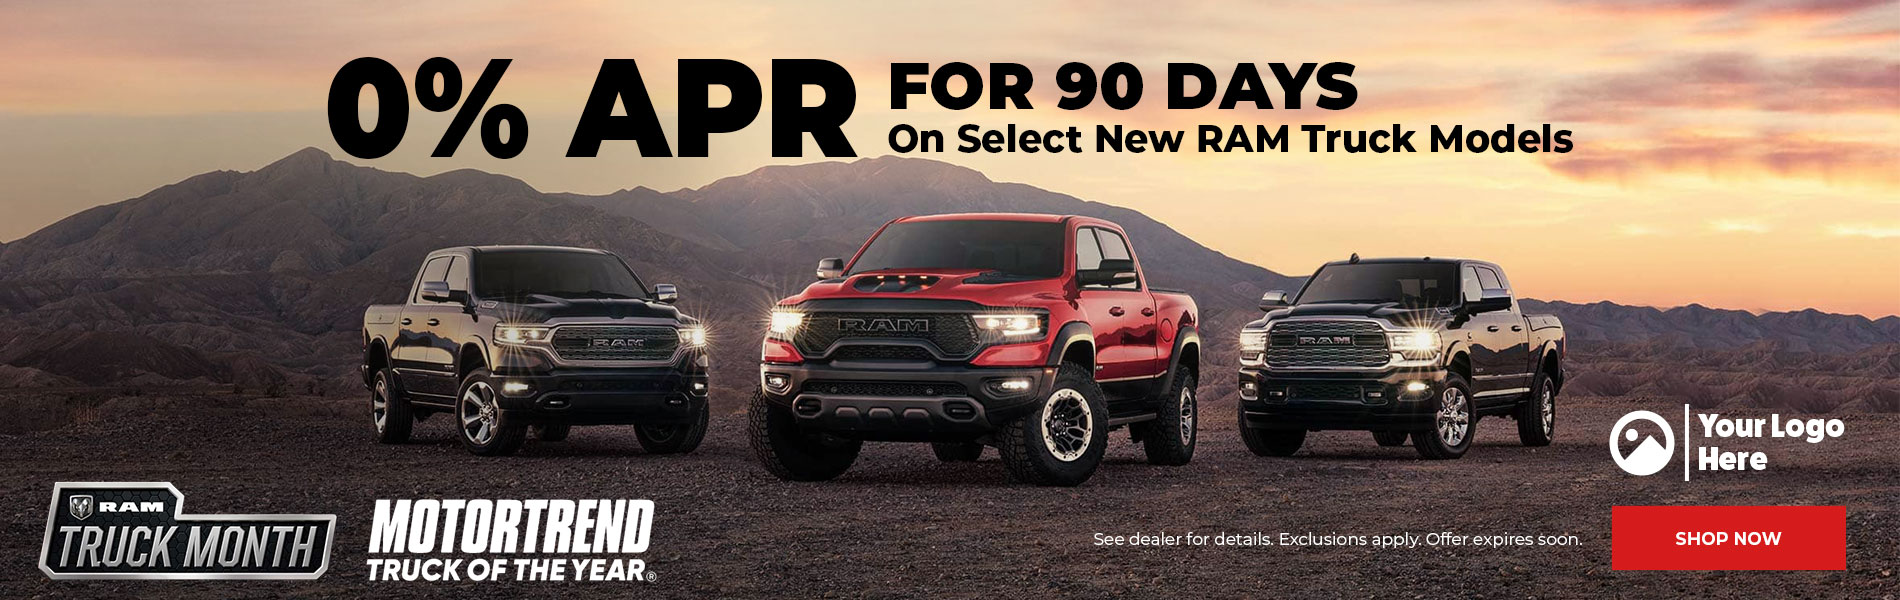 0% APR for 90 Days on Select New RAM Truck Models